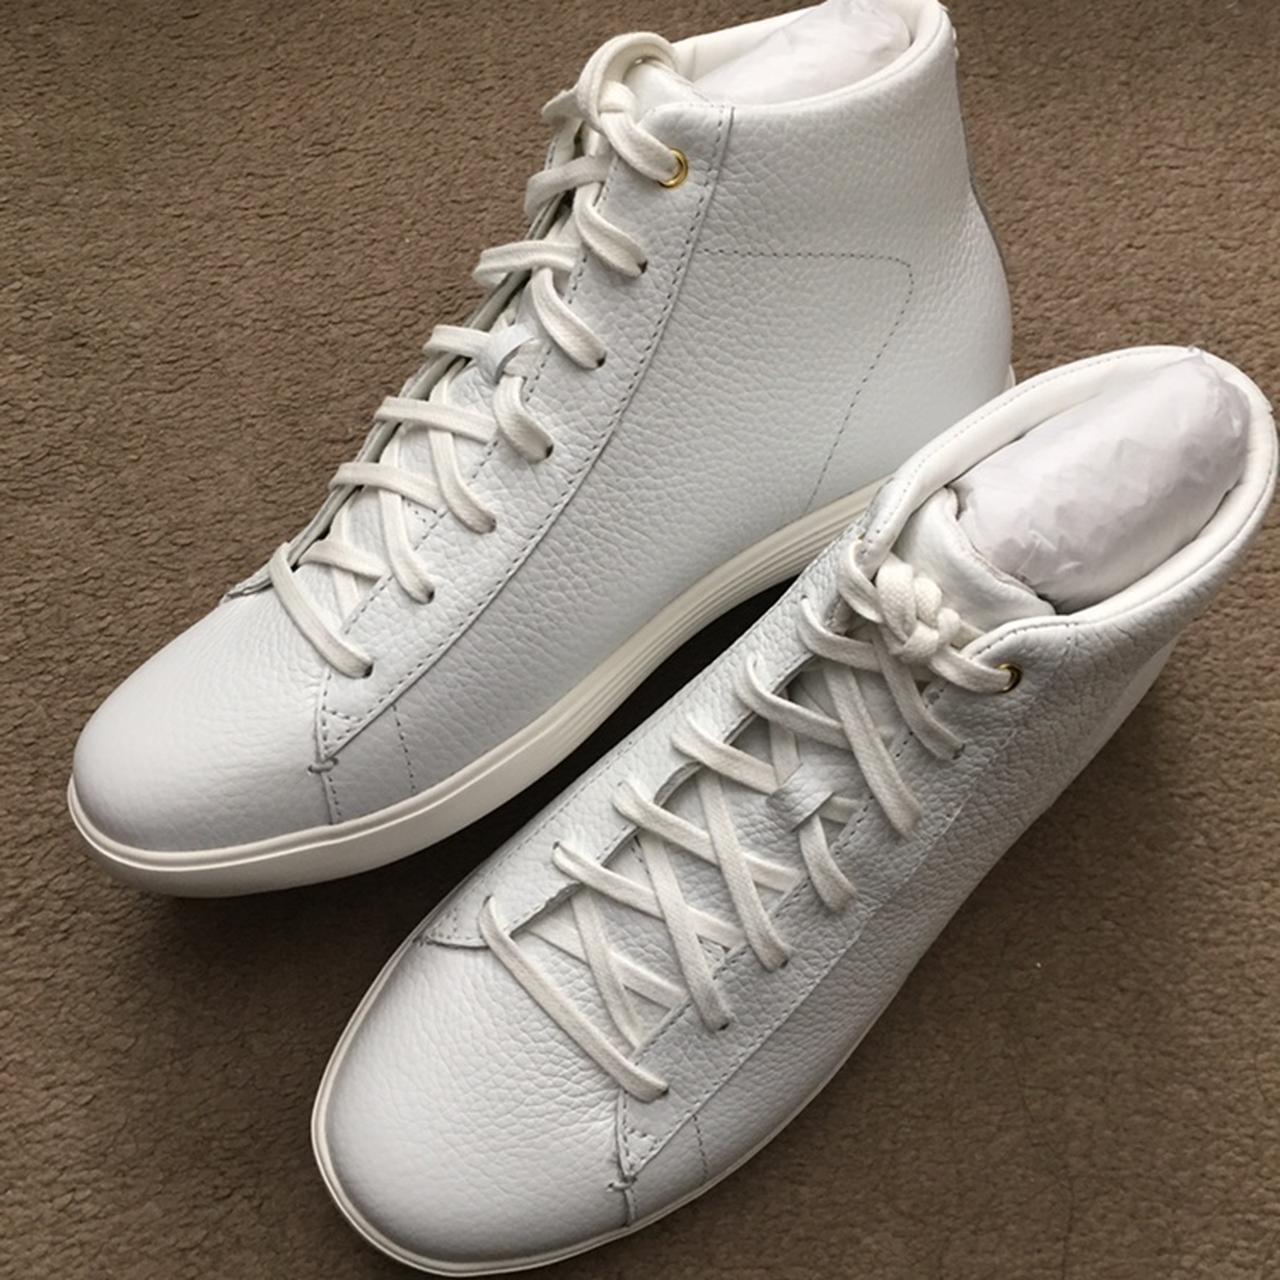 Product Image 1 - Cole Haan white leather high